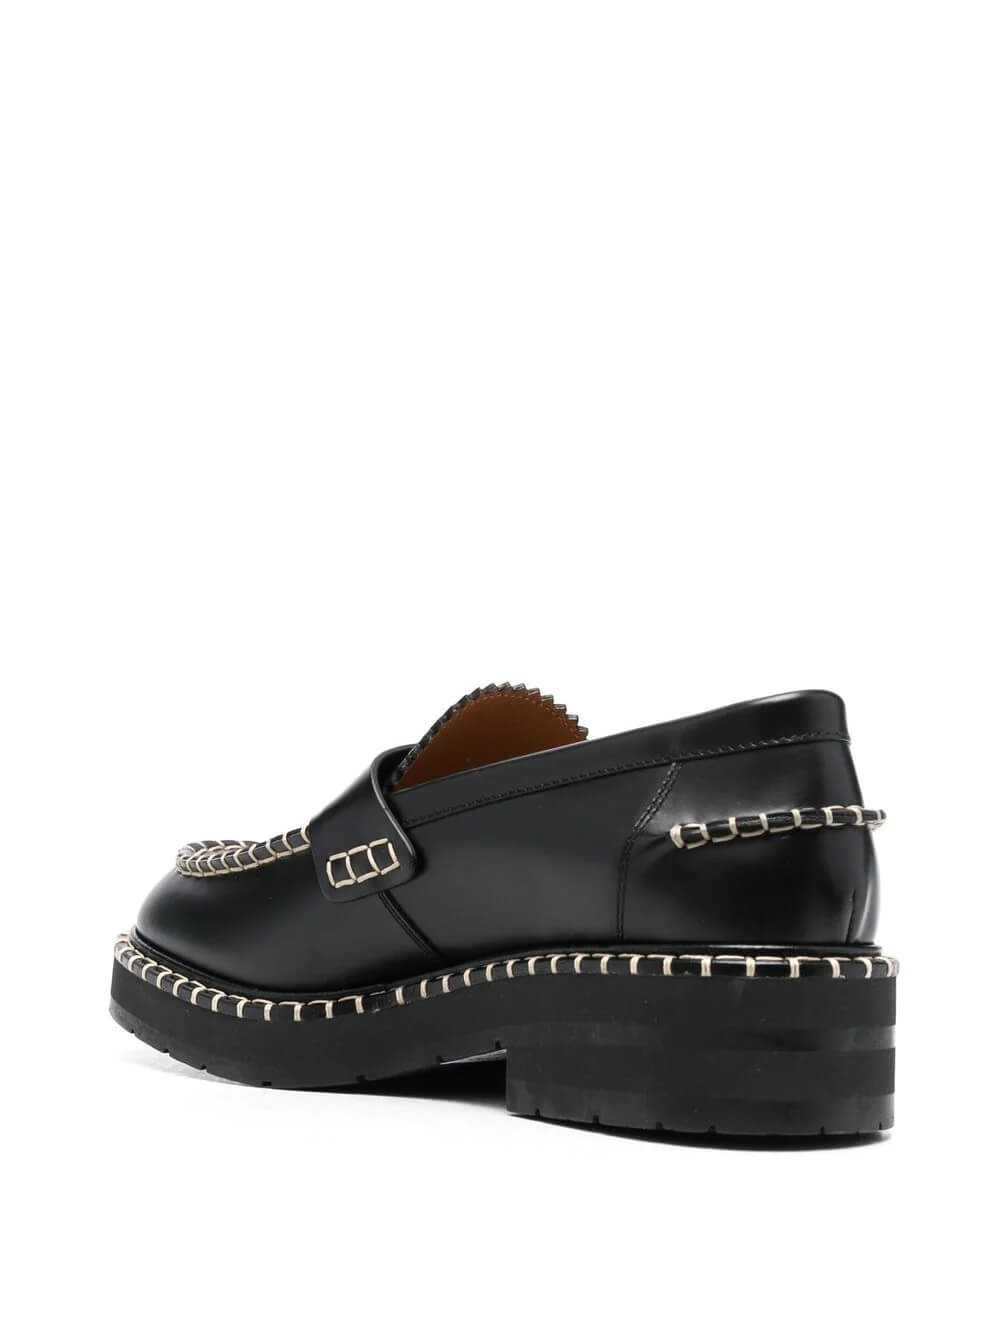 Chloé Noua Loafer in Black available at The New Trend